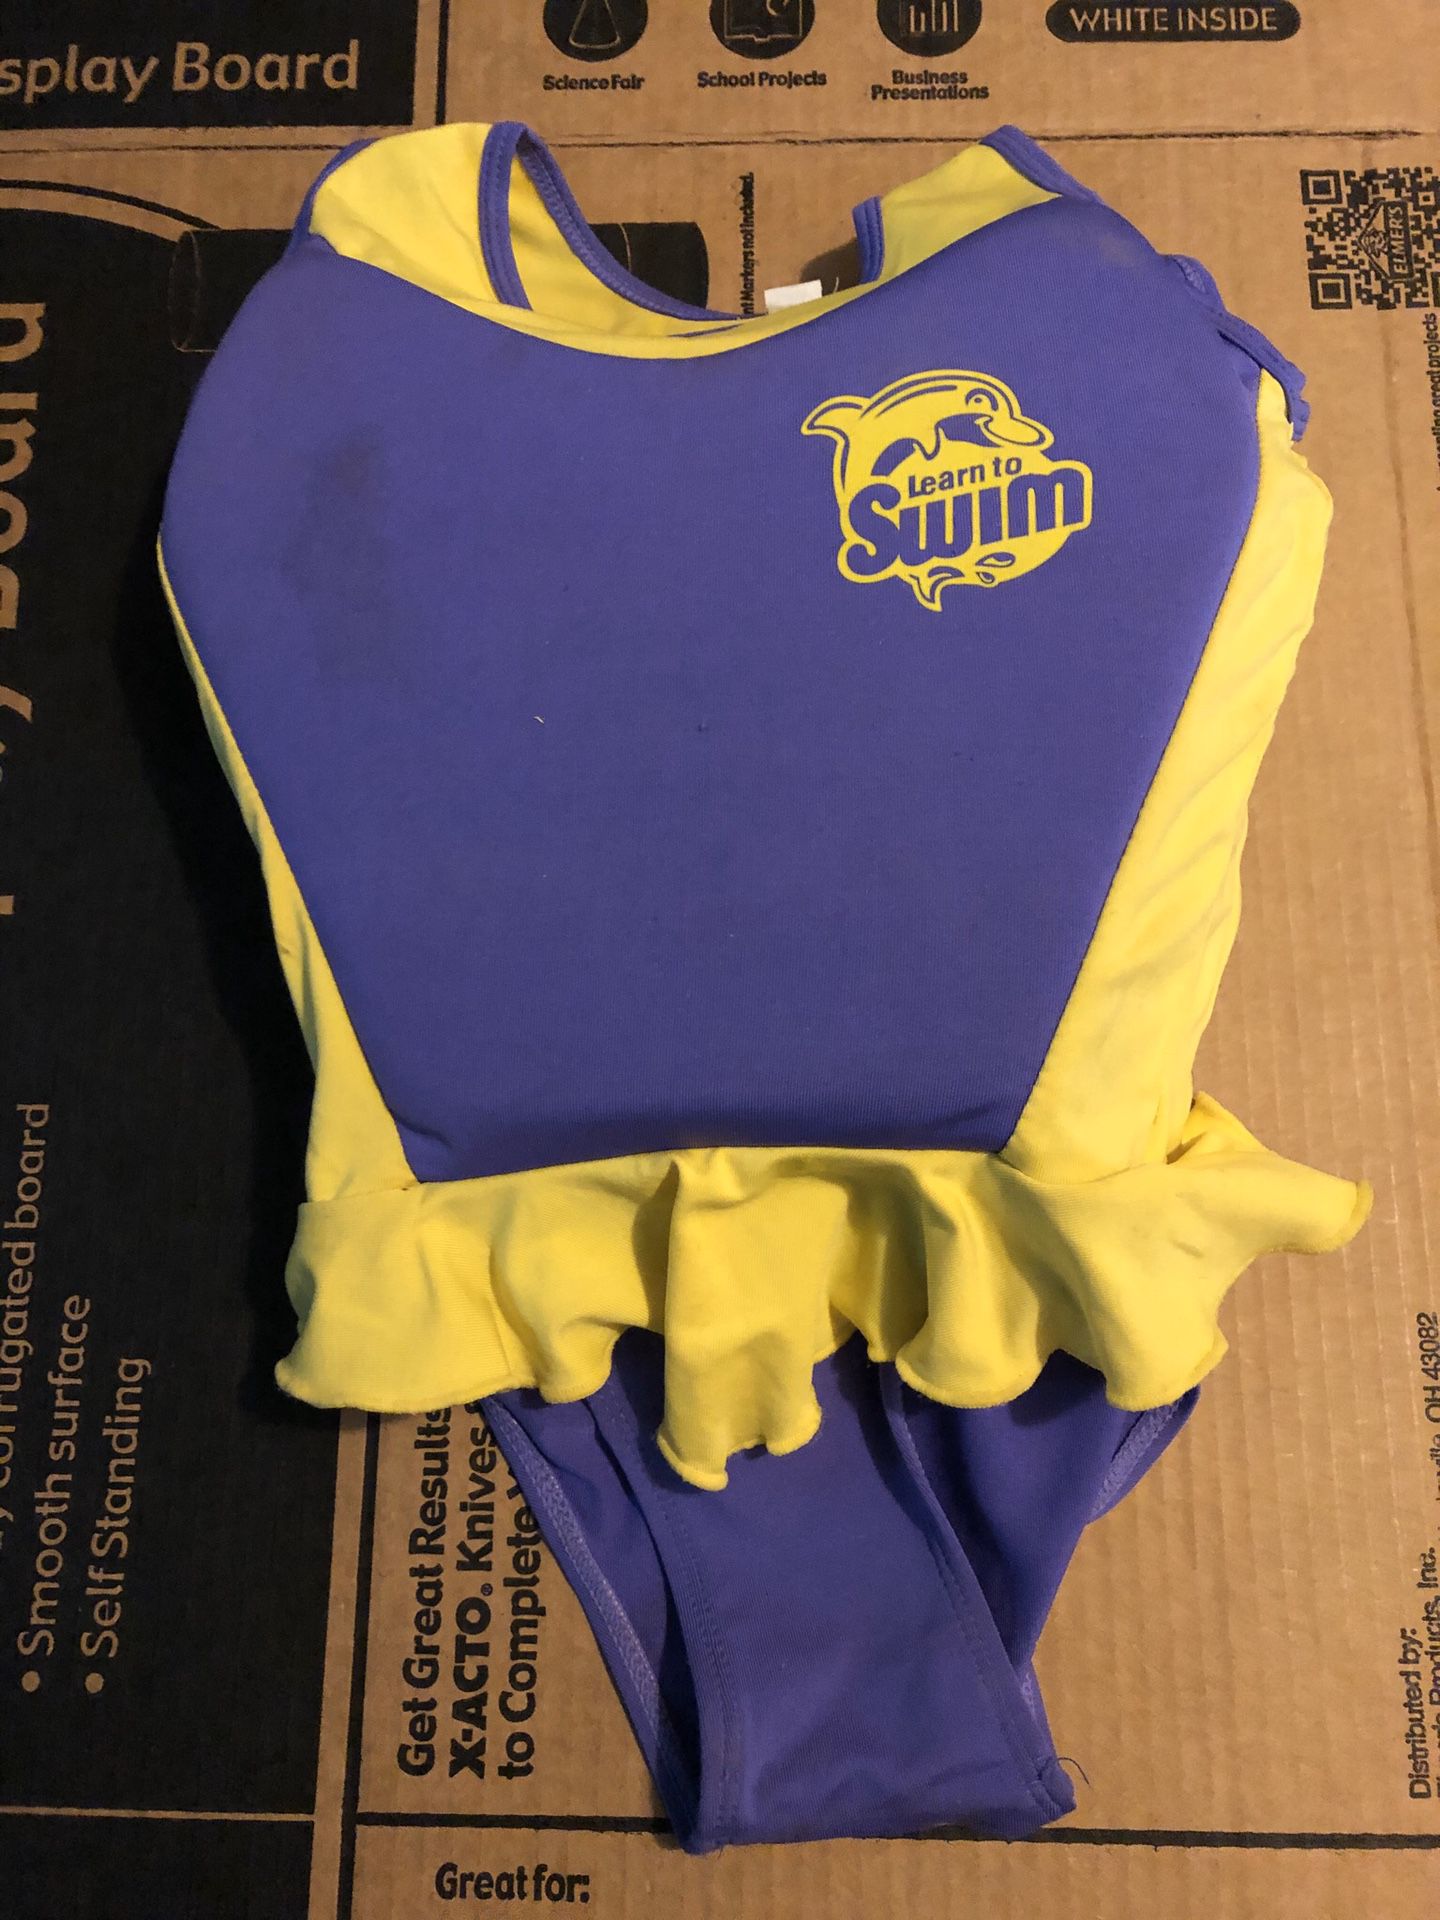 Getting ready for summer Swimming life vest for kids small